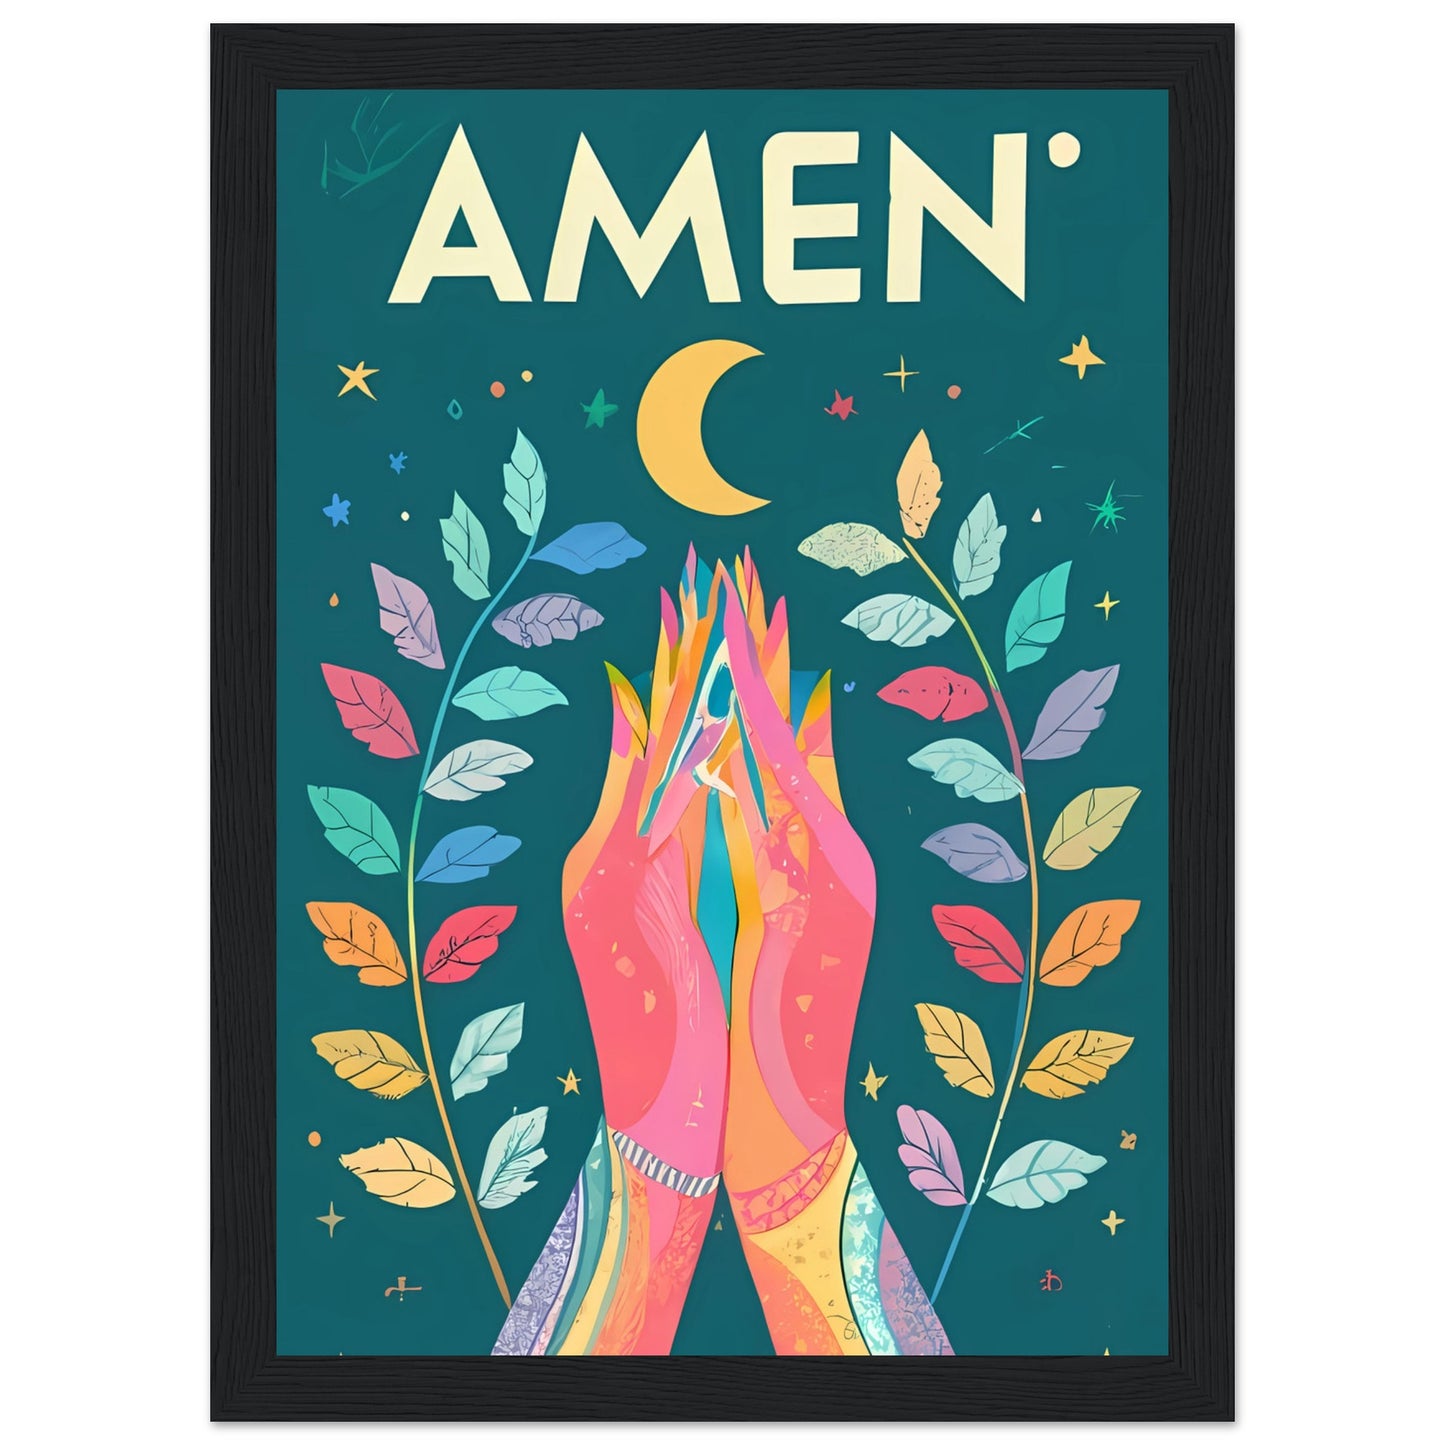 AMEN Hands Raised in Worship Framed Poster with Rainbow Floral, Star, and Moon